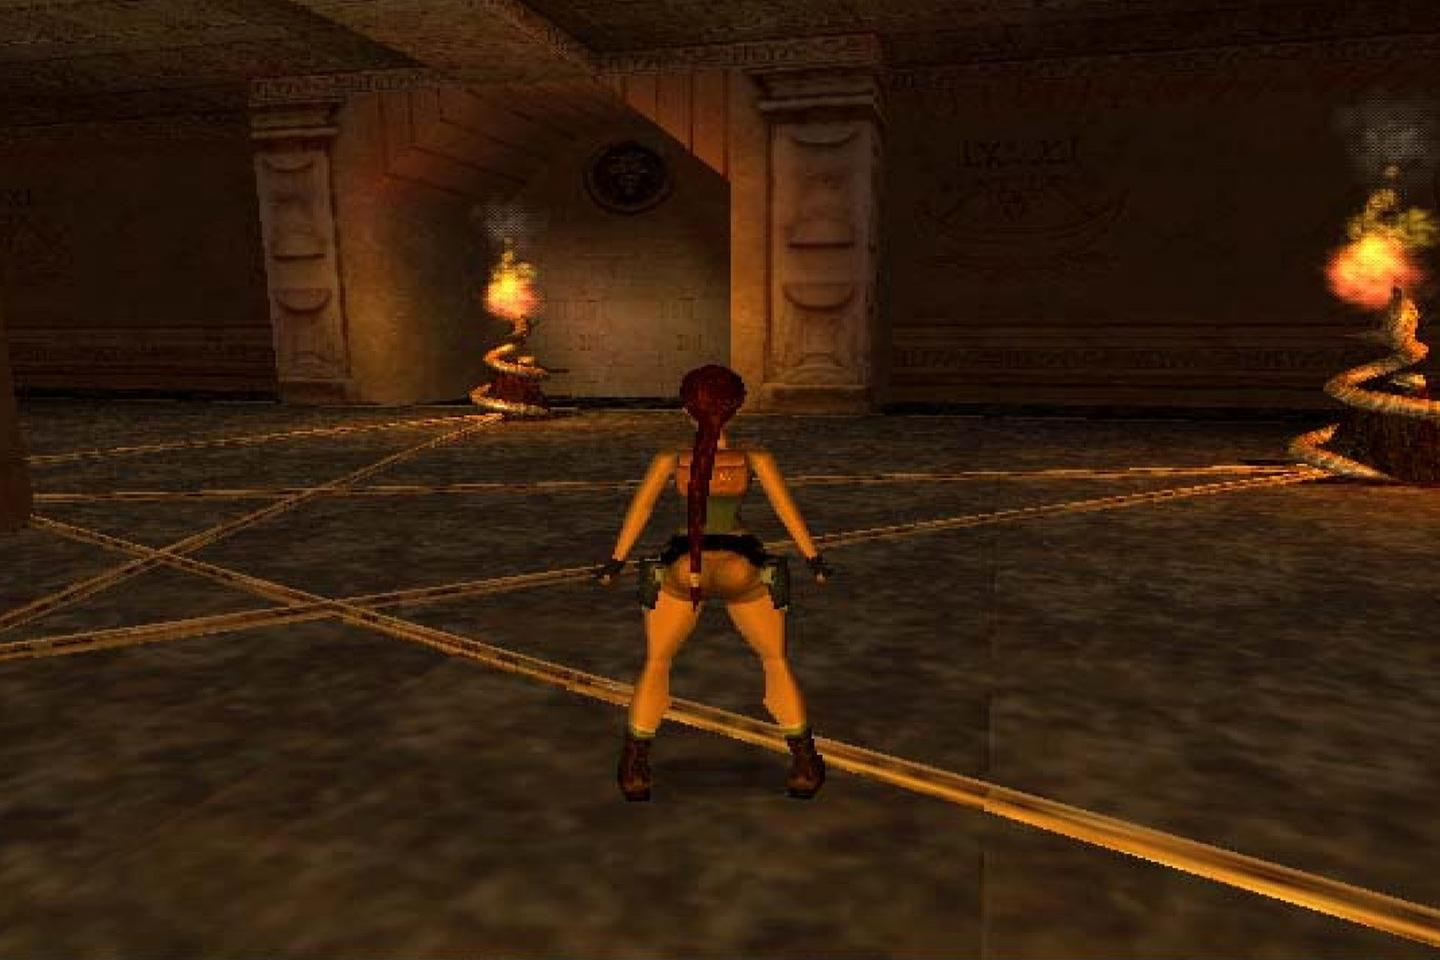 An in-game image of Lara with red hair and a yellow-black outfit standing in a dimly lit room with torches on the walls and hieroglyphic inscriptions.